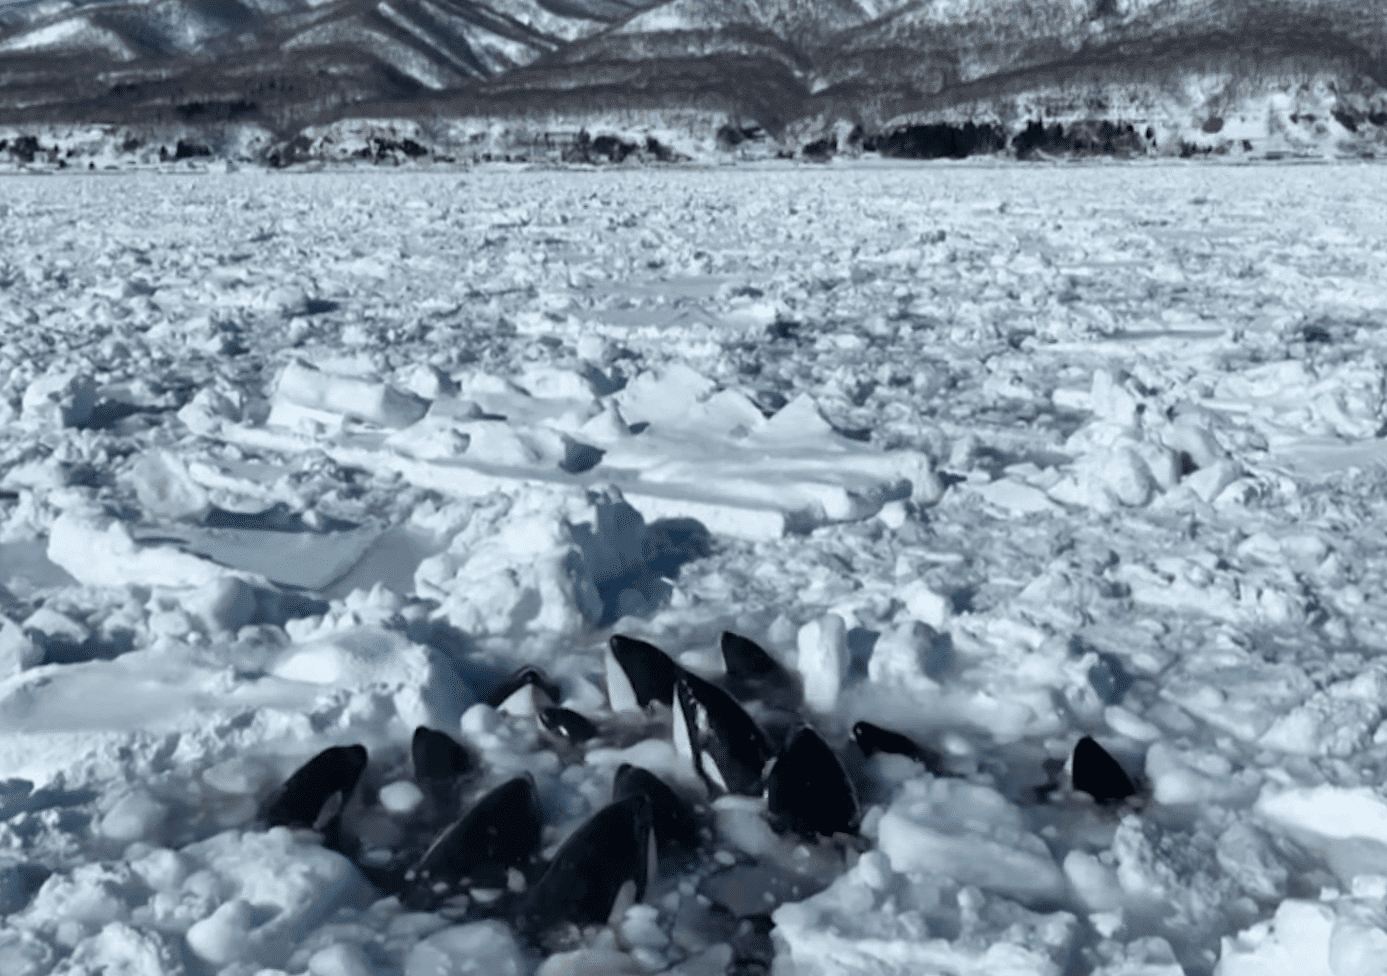 Orca trapped in ice